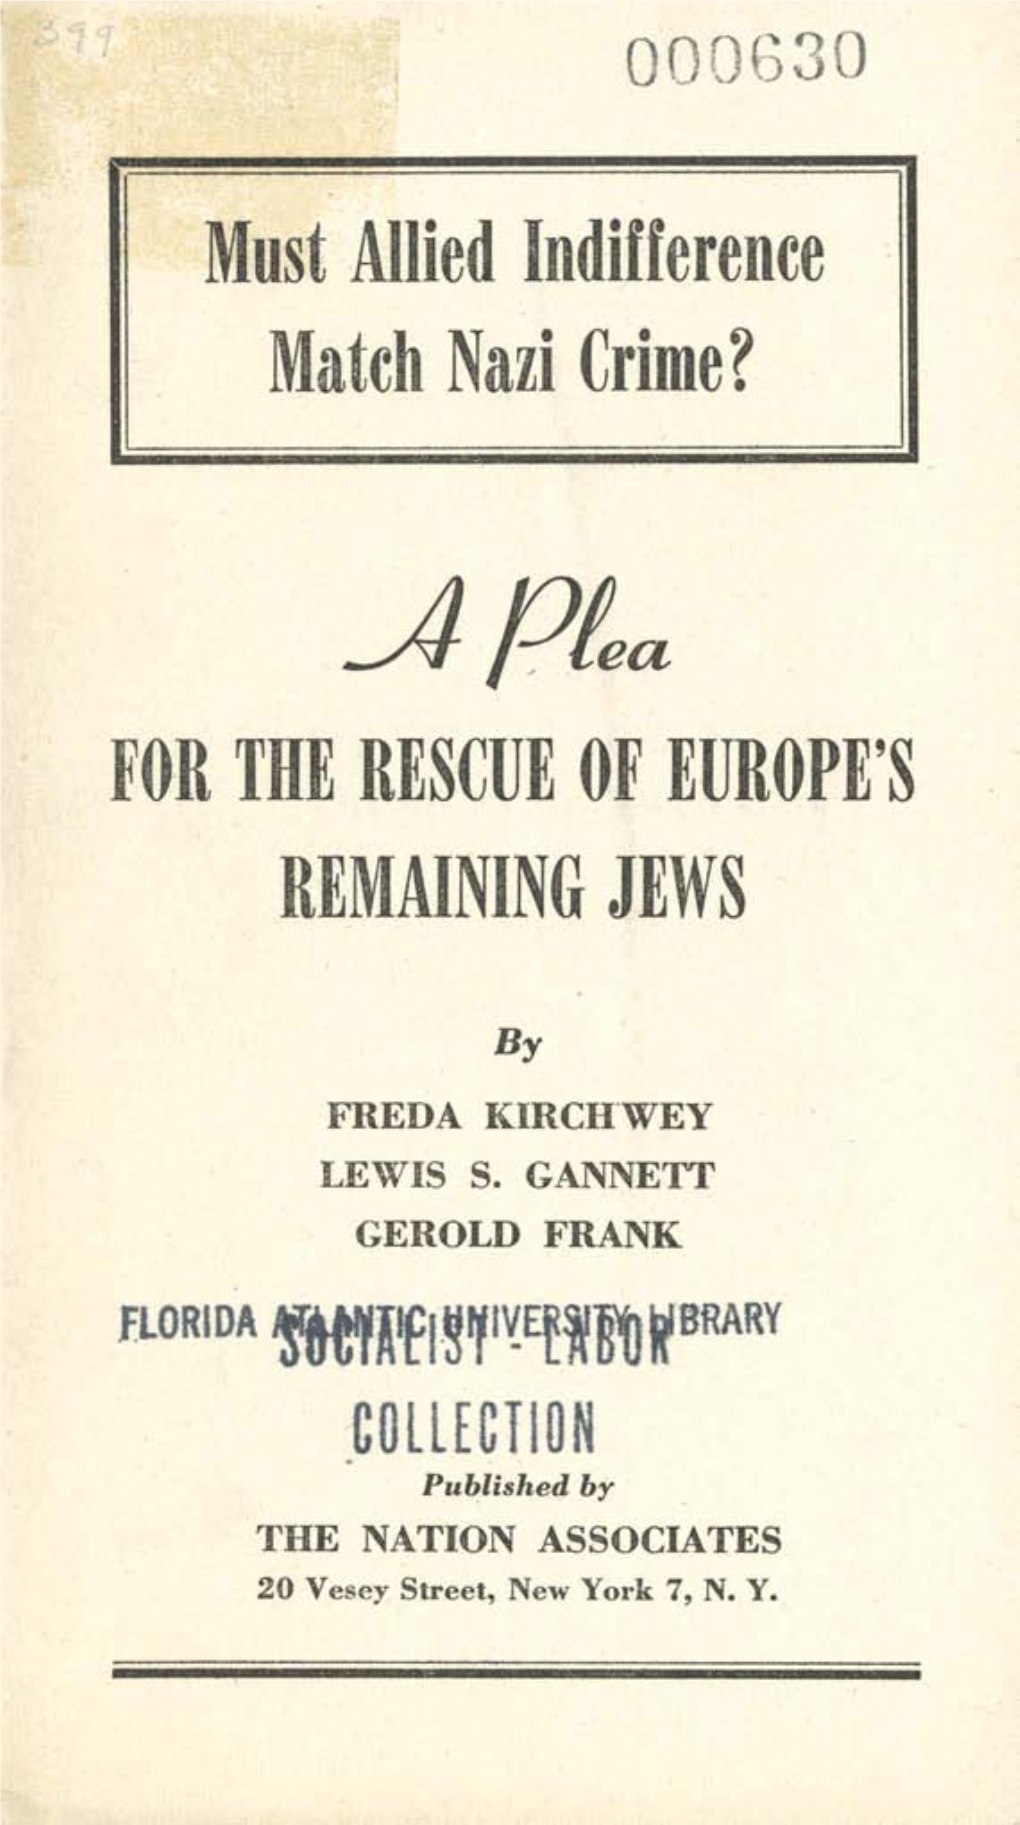 Aplea for the RESCUE of EUROPE's REMAINING JEWS